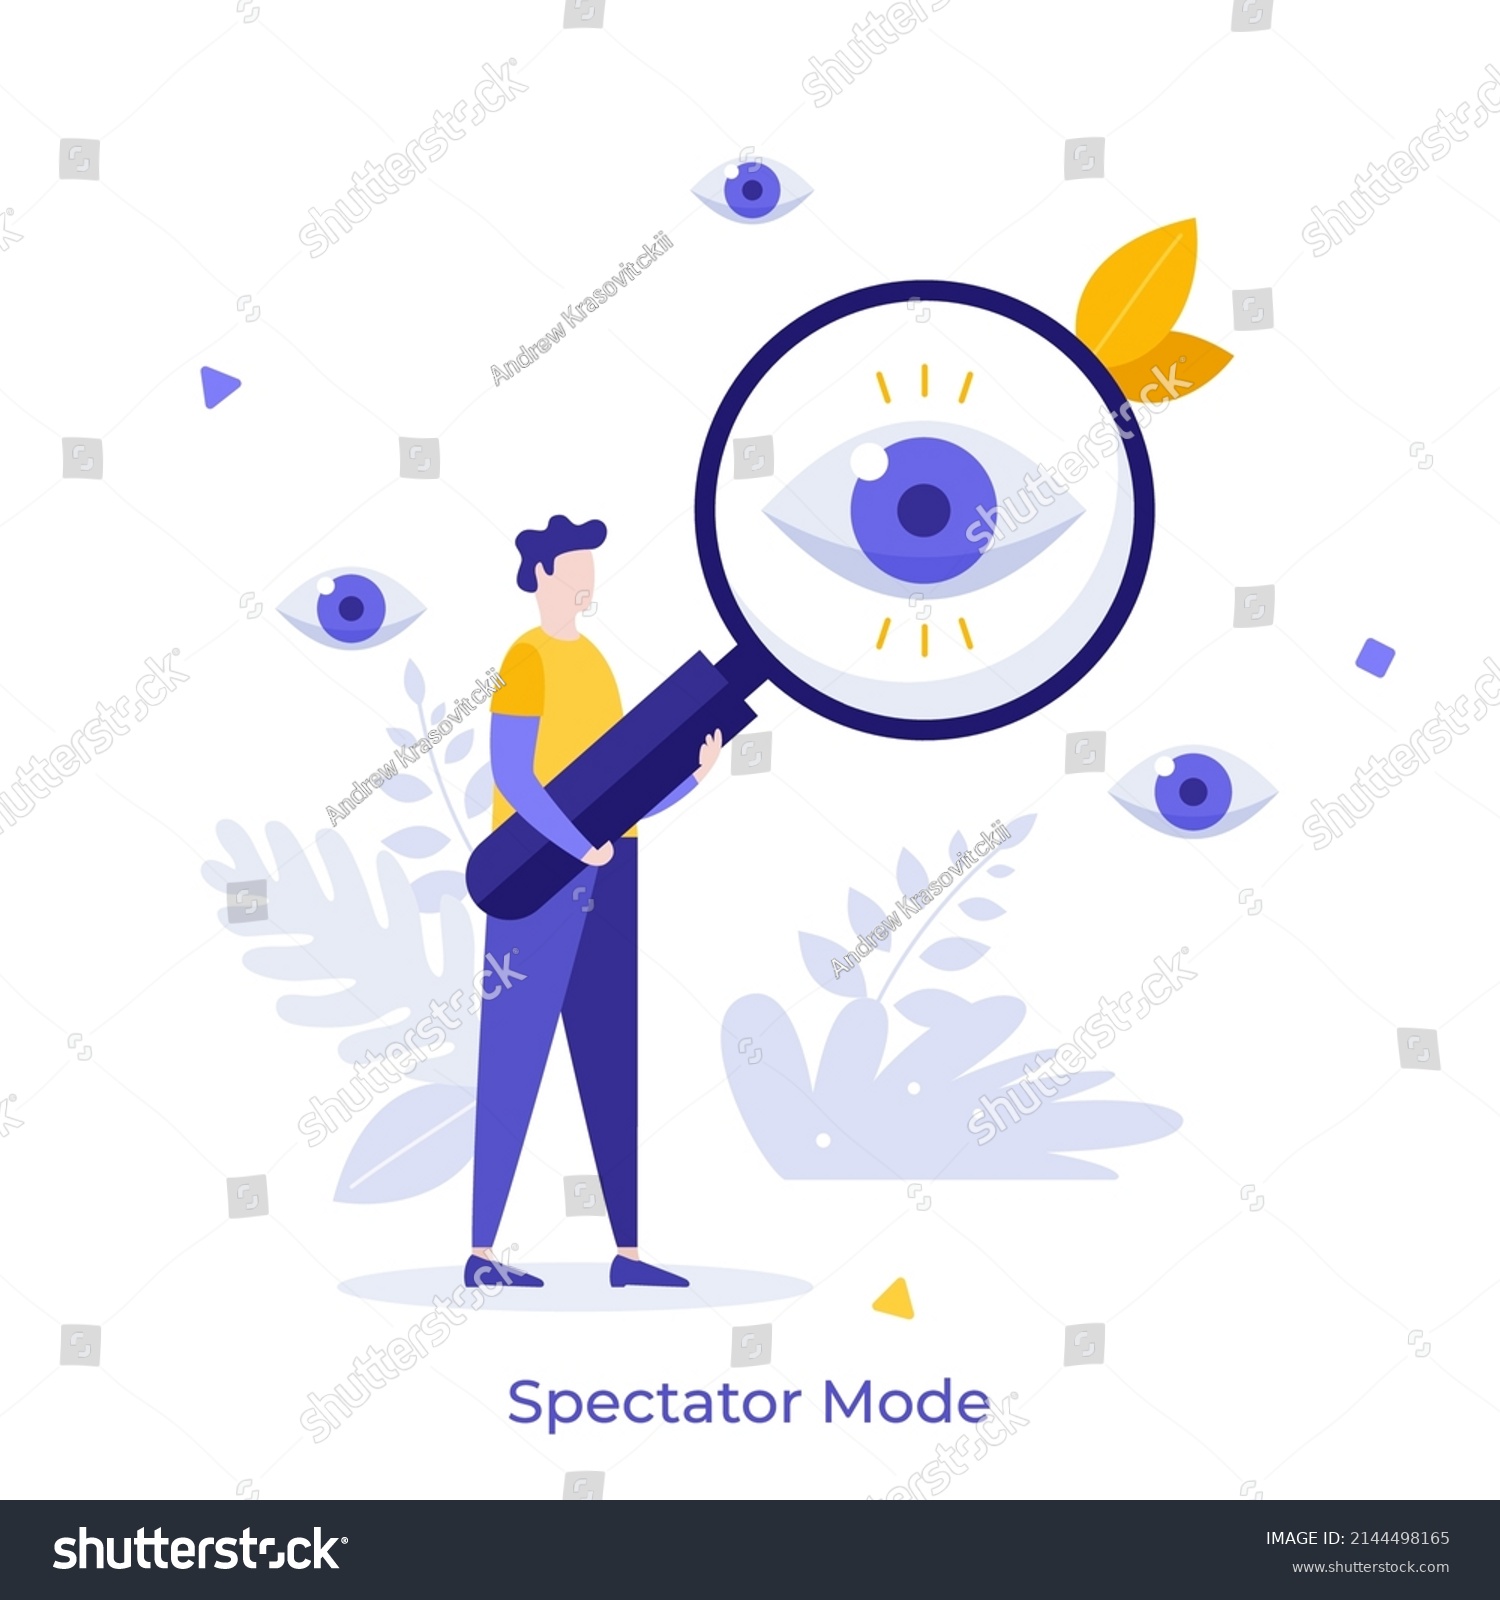 Person looking at eye through magnifying glass. Concept of spectator or observer mode, privacy option, setting to disguise internet presence. Modern flat vector illustration for banner, poster. #2144498165